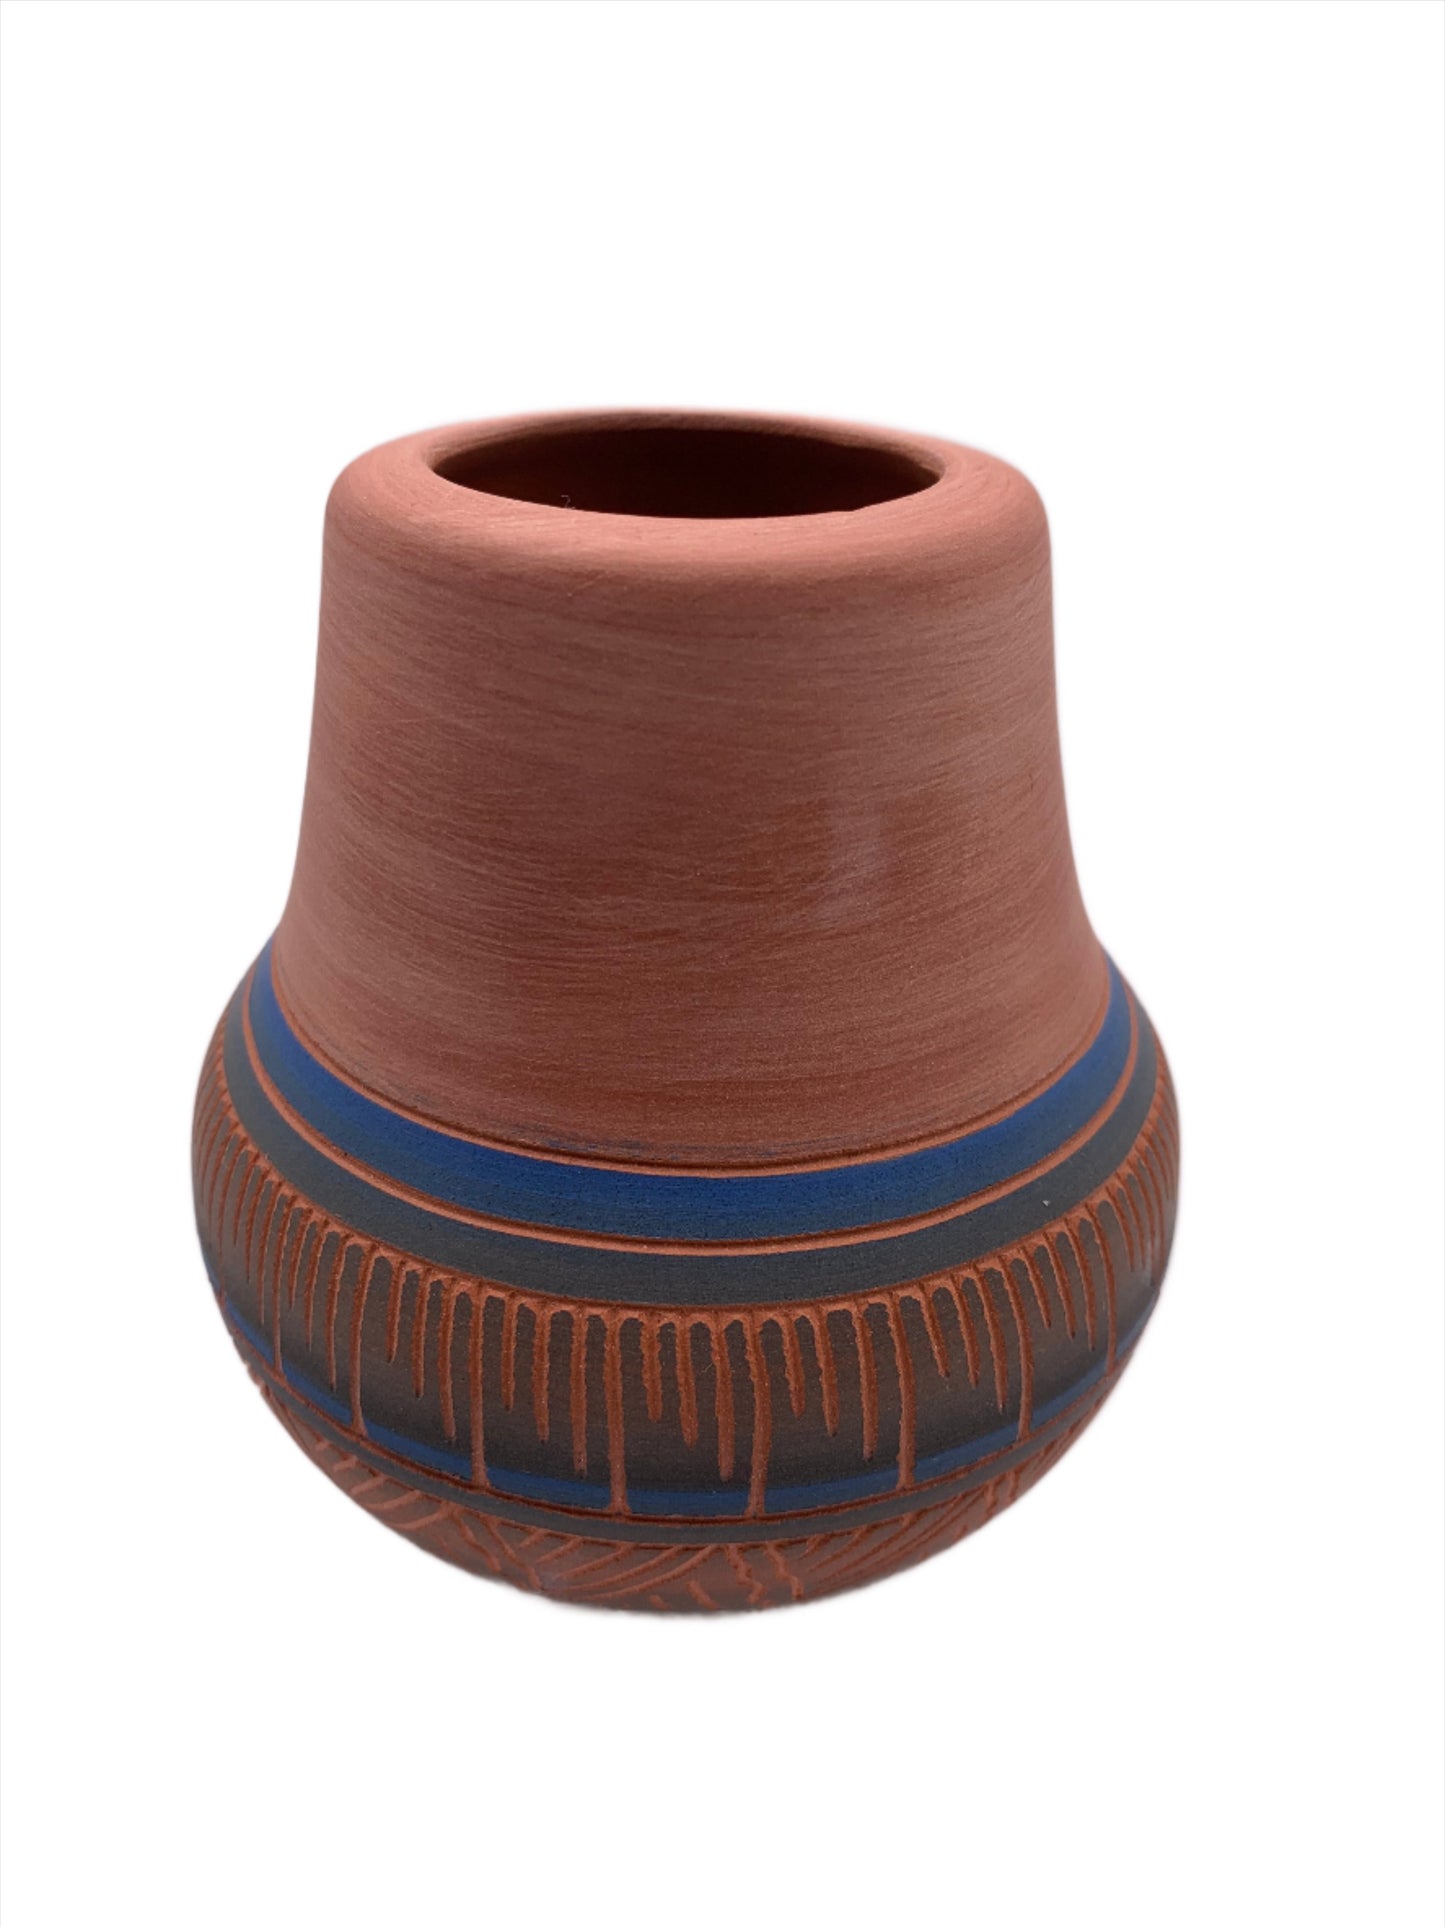 Navajo Etched Pottery by Roselyn Joe